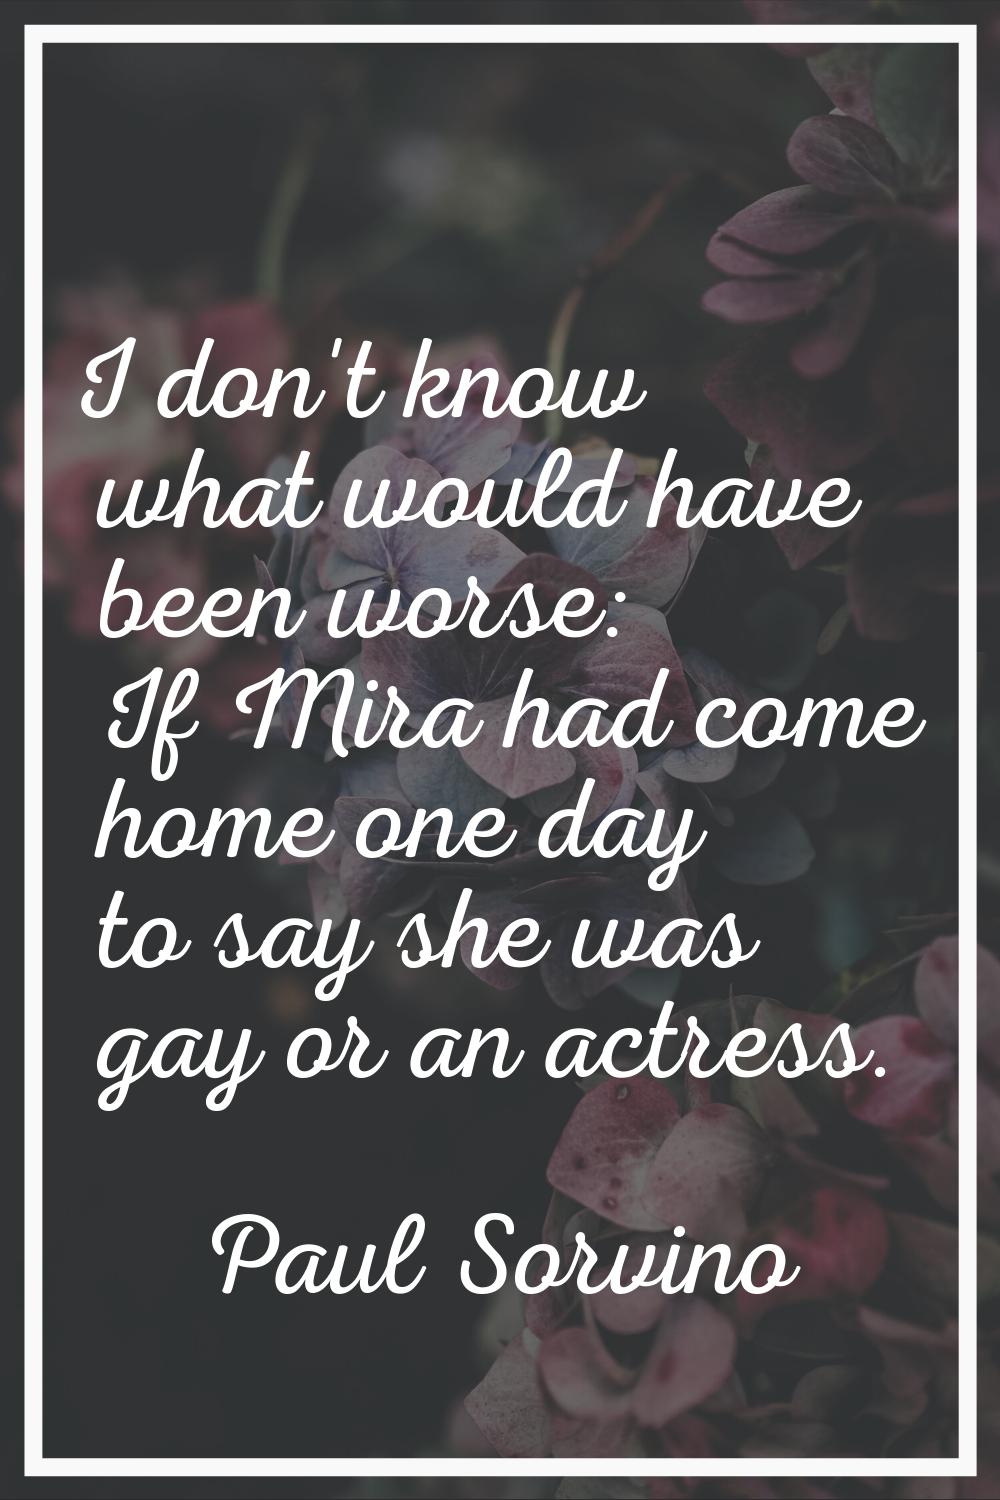 I don't know what would have been worse: If Mira had come home one day to say she was gay or an act